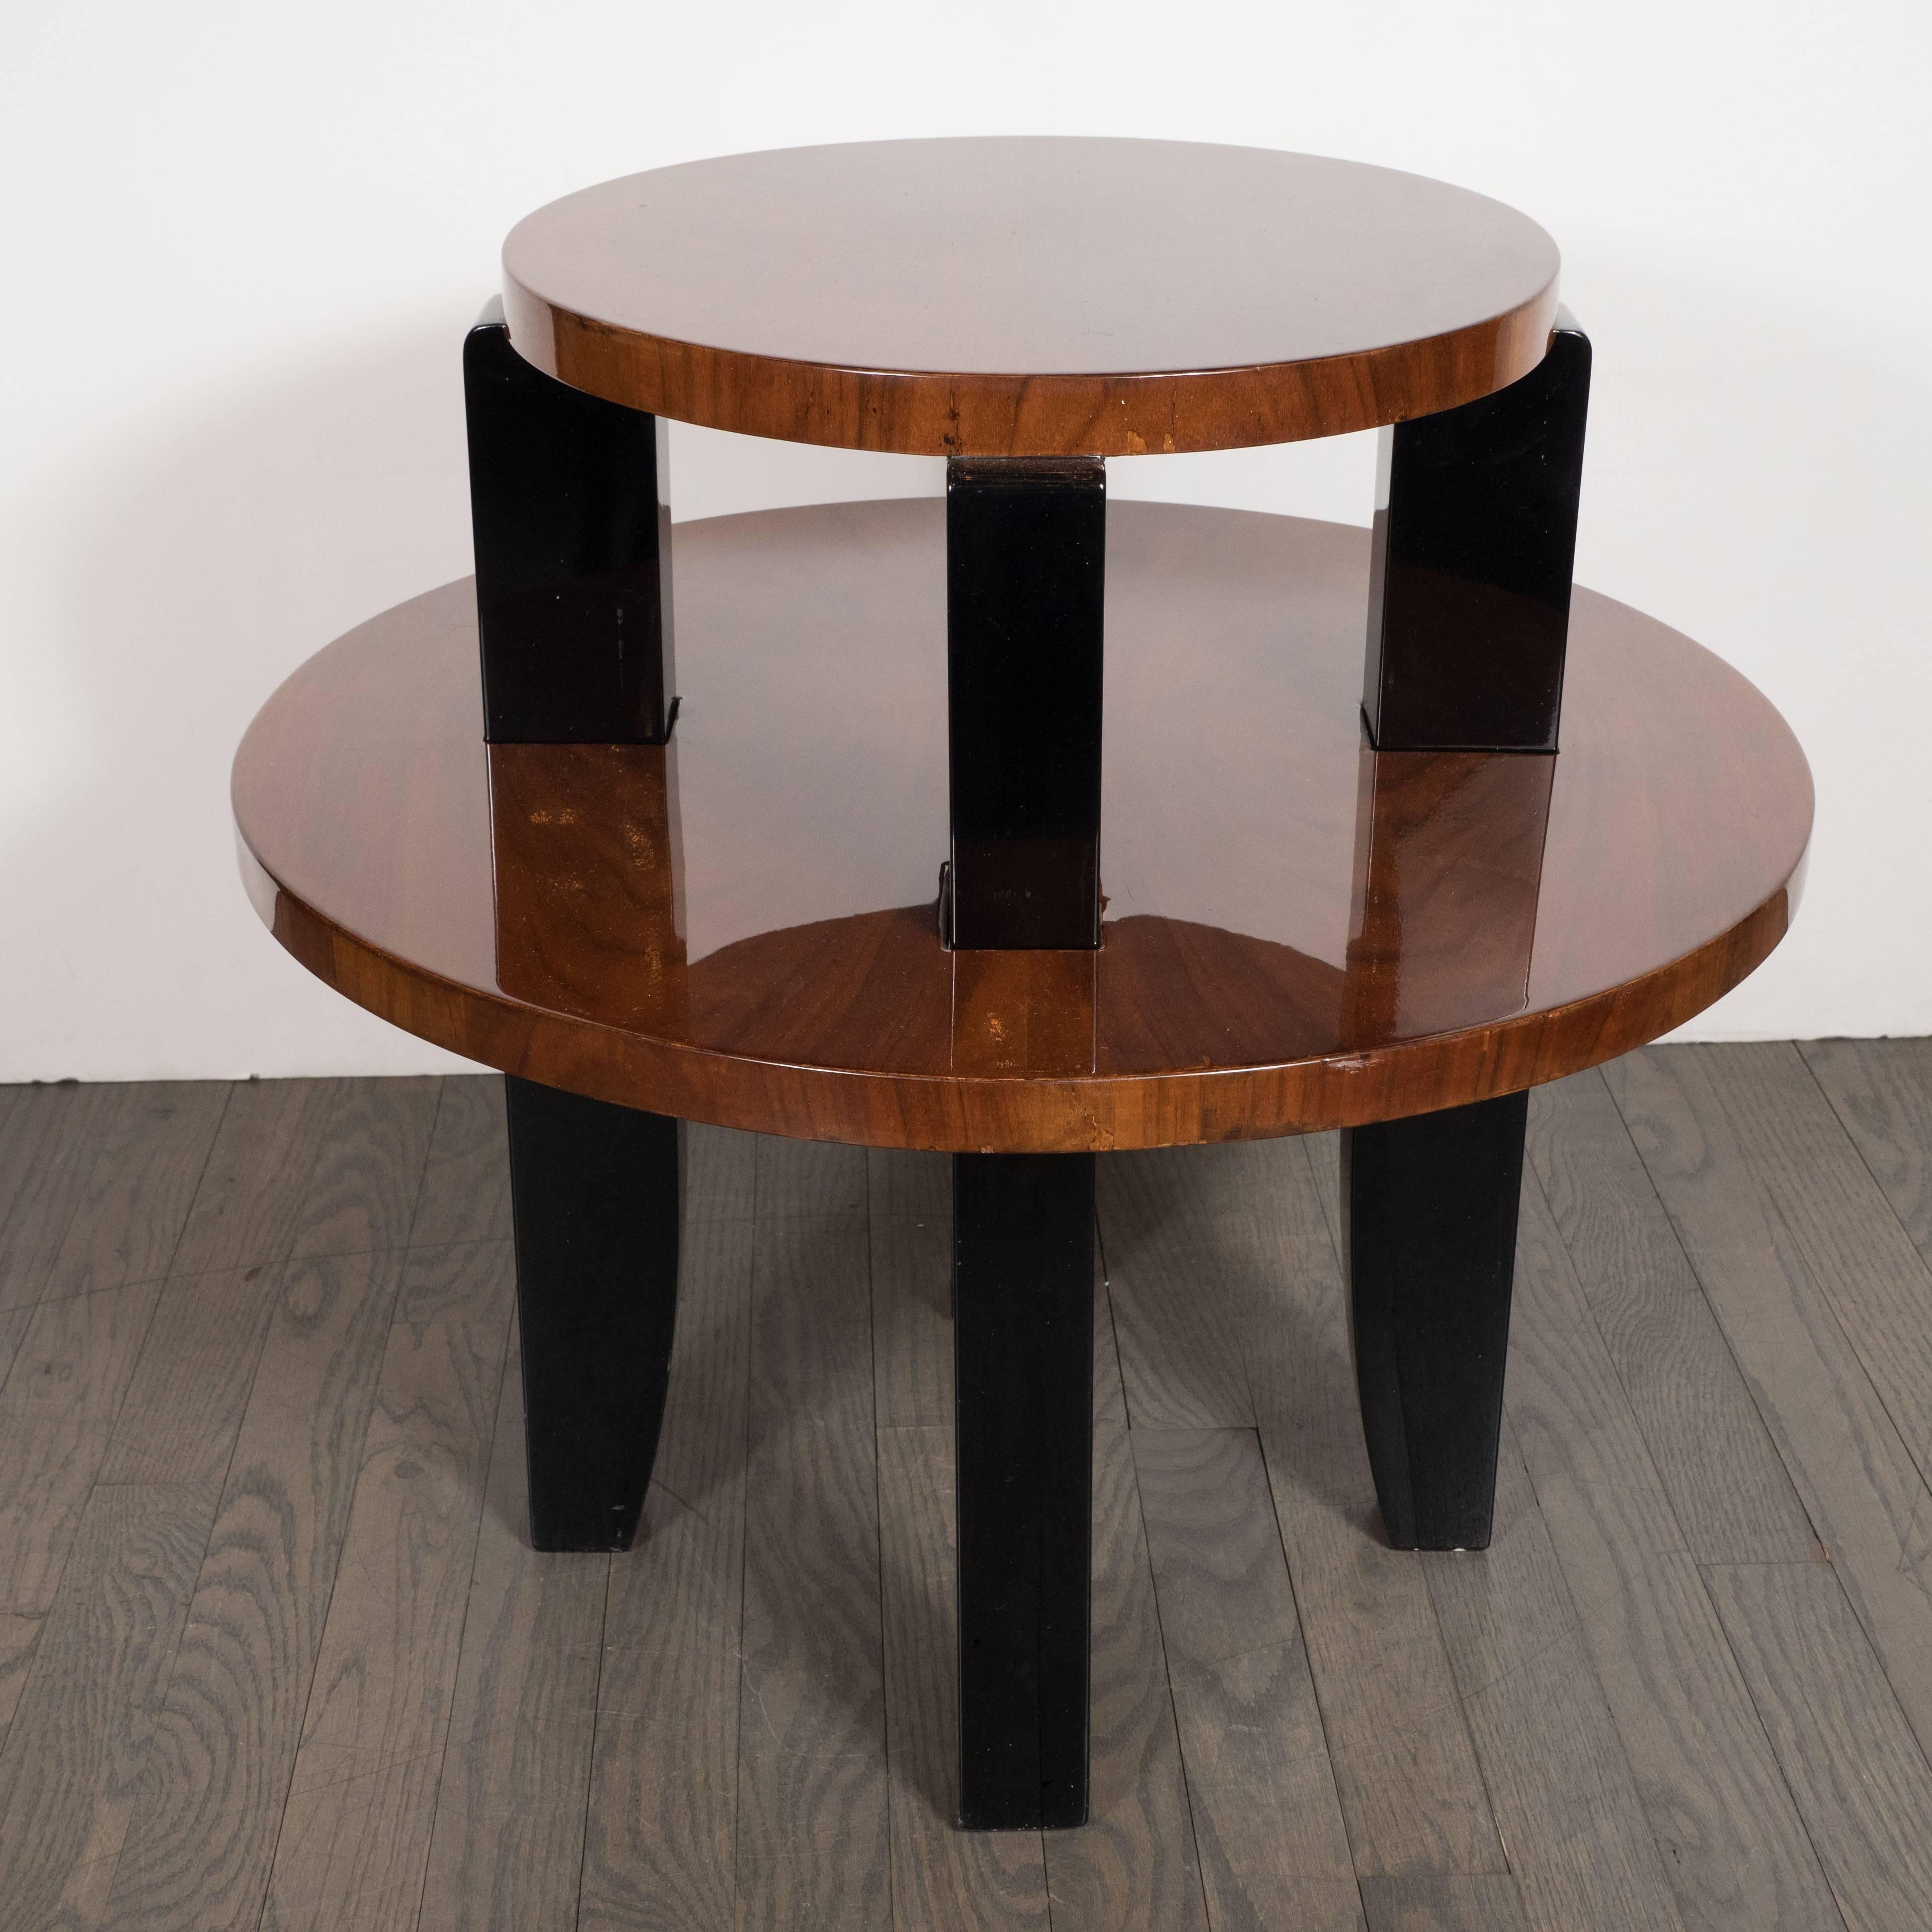 This stunning two-tier occasional/ side table was realized in France, circa 1935. It features two circular tiers composed of bookmatched walnut attached with black lacquer saber style legs. This piece showcases the understated and refined beauty of